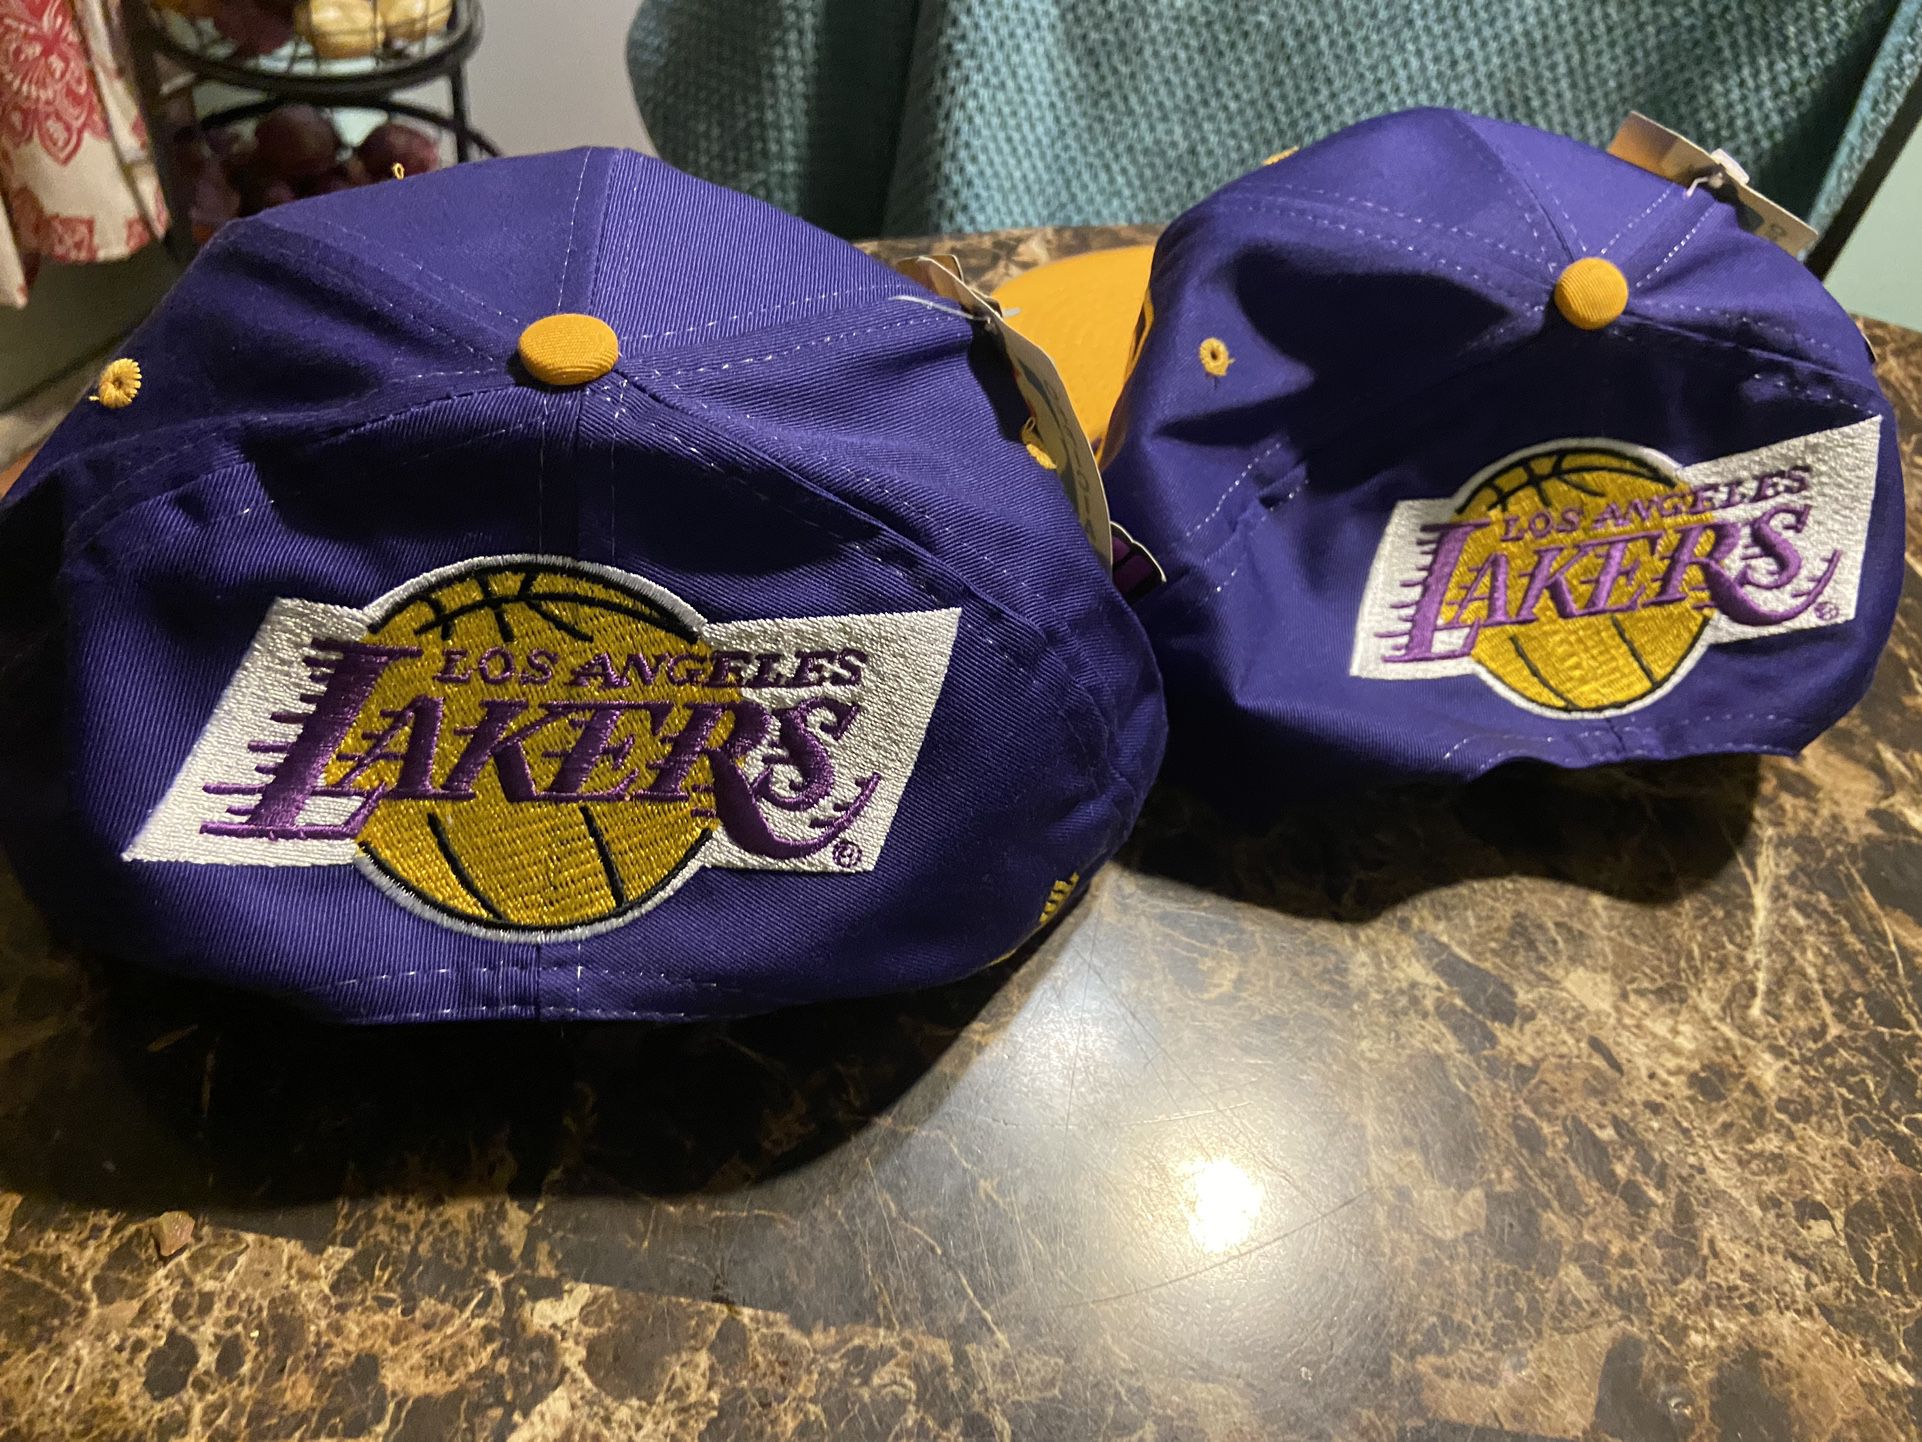 Los angeles Lakers 90’s Hats New $50 Each